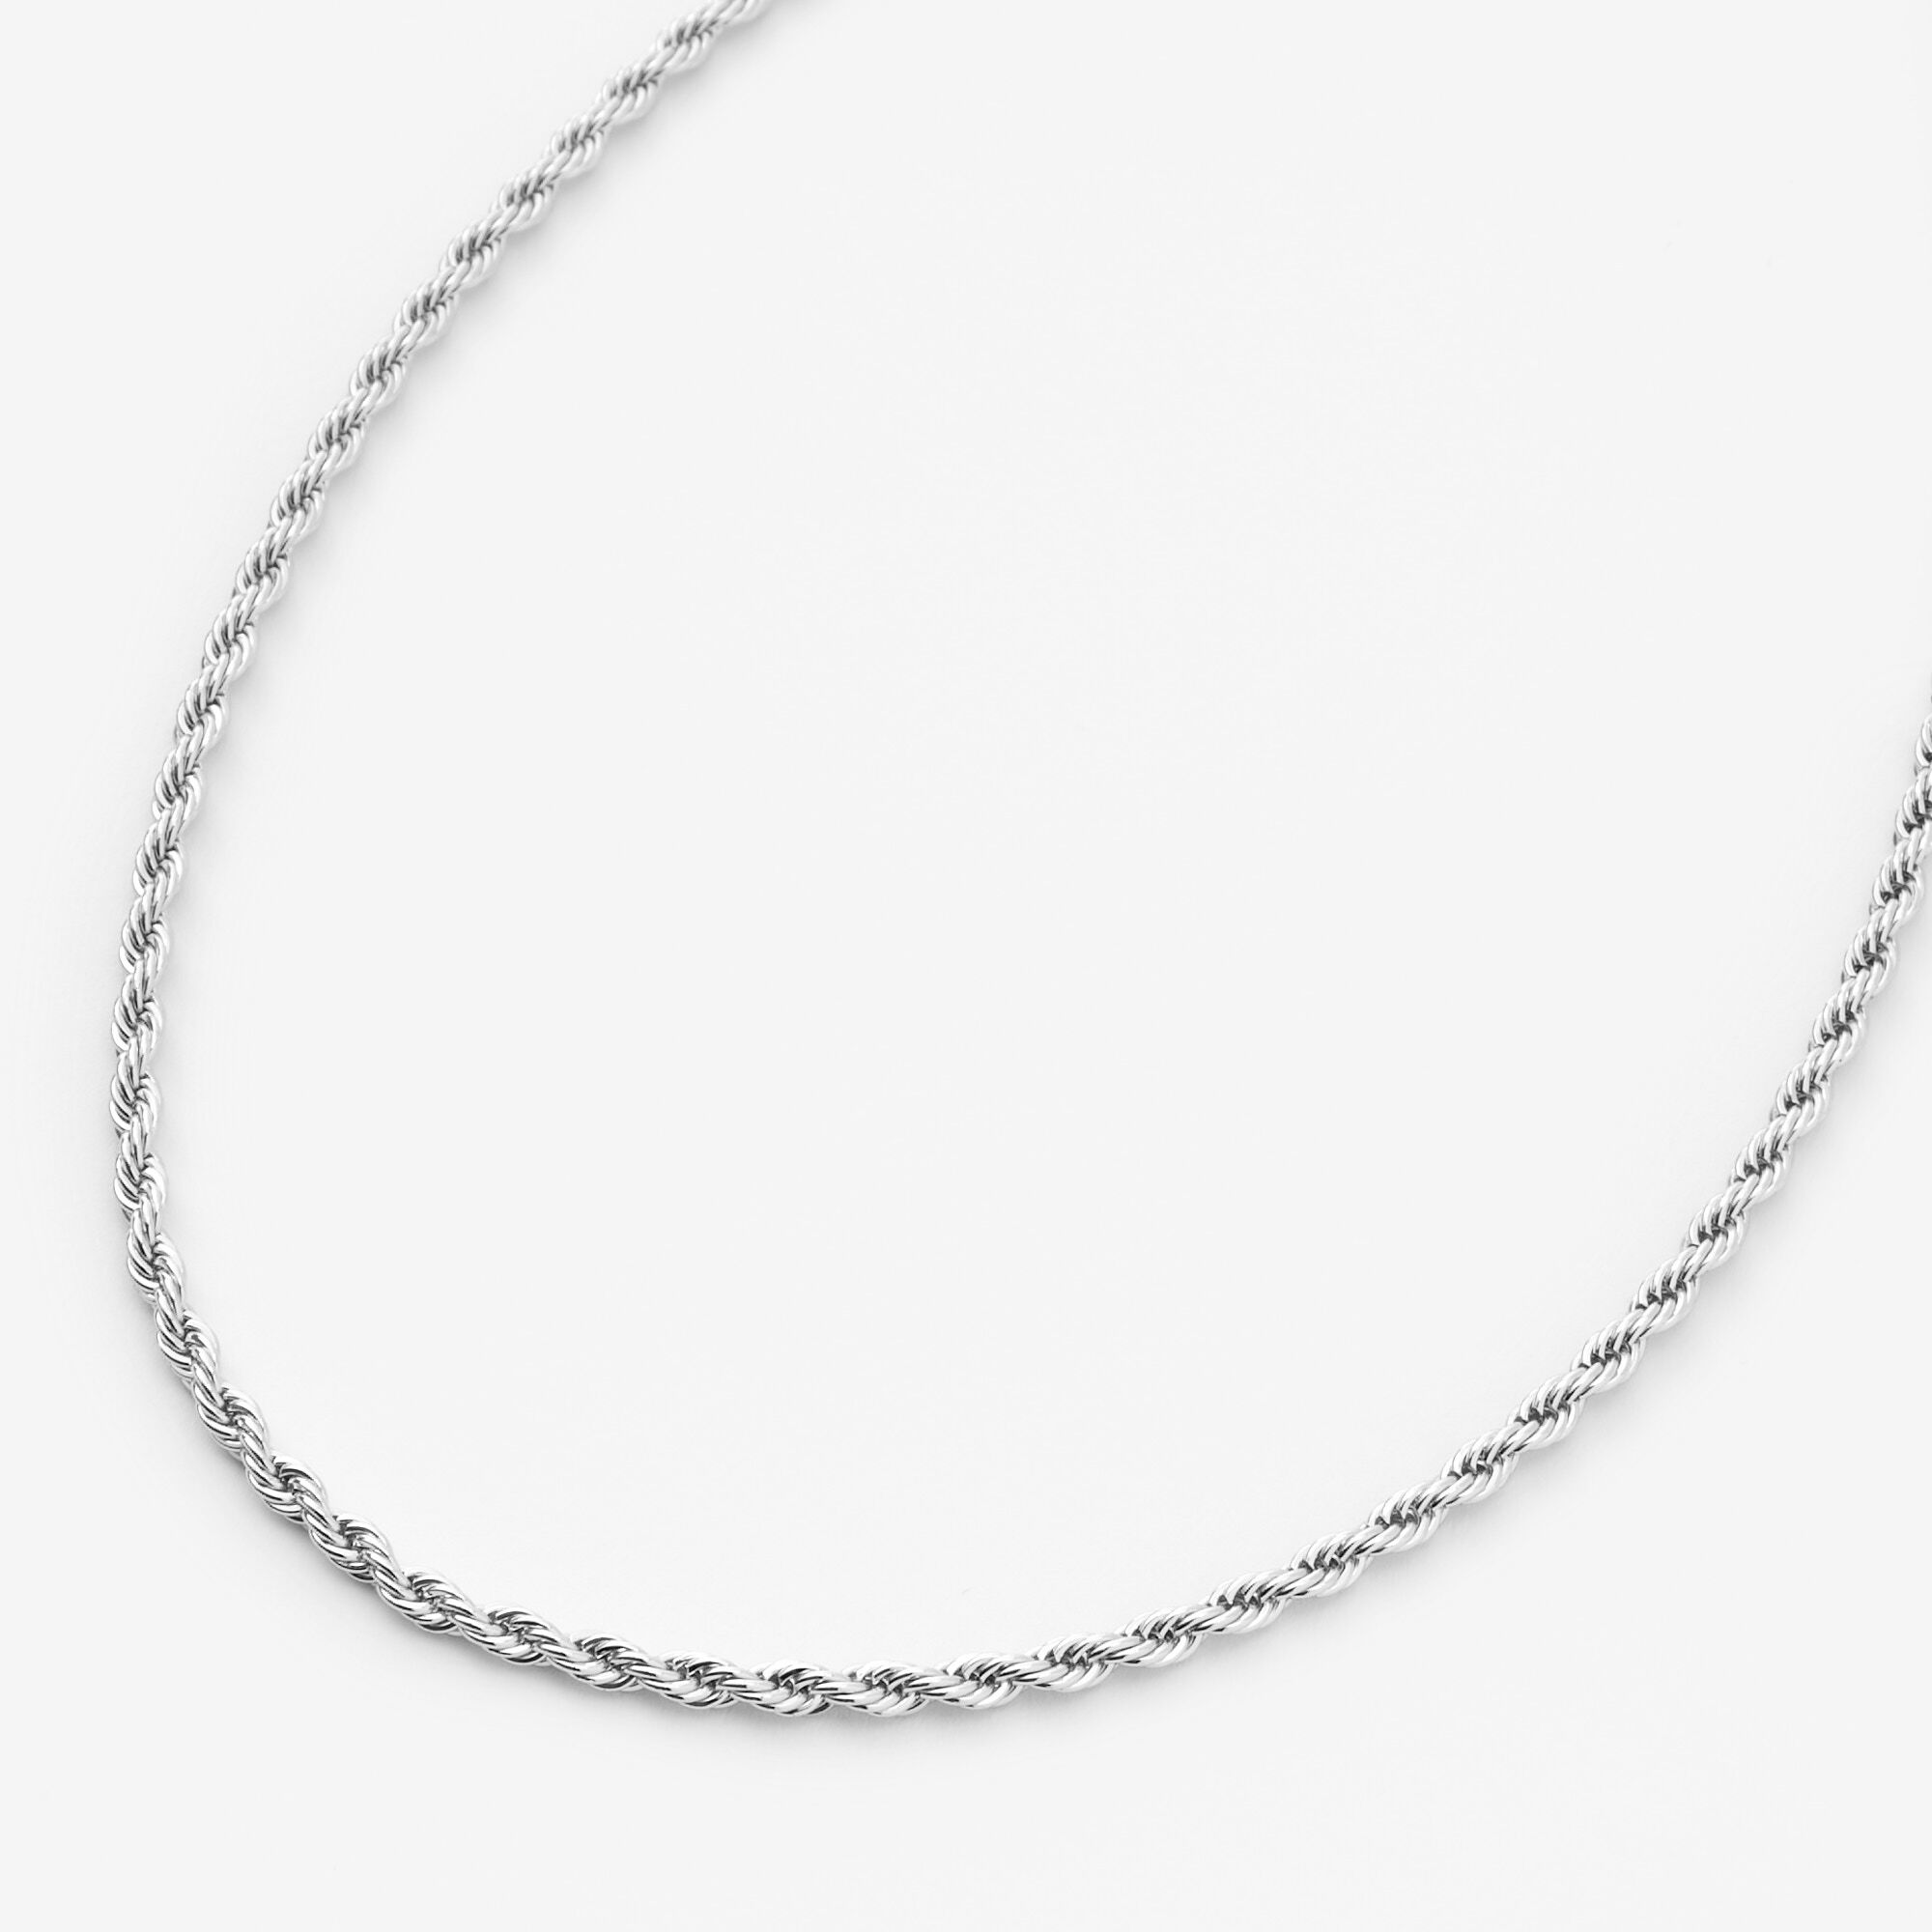 View Claires Tone Thin Twisted Rope Chain 20 Necklace Silver information